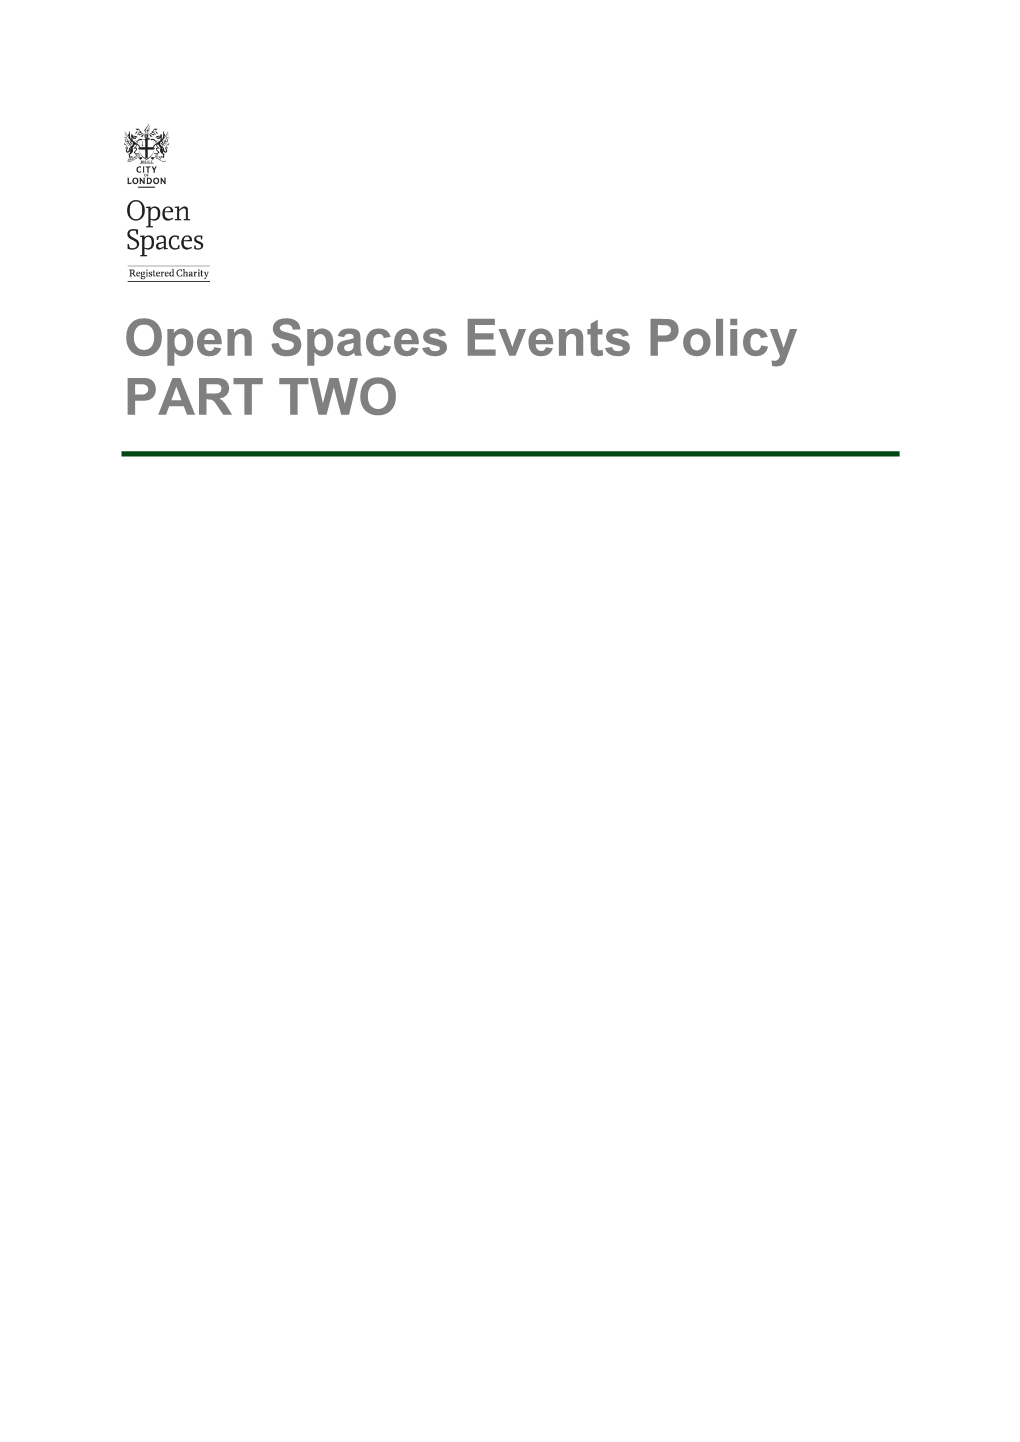 Open Spaces Events Policy PART TWO Contents